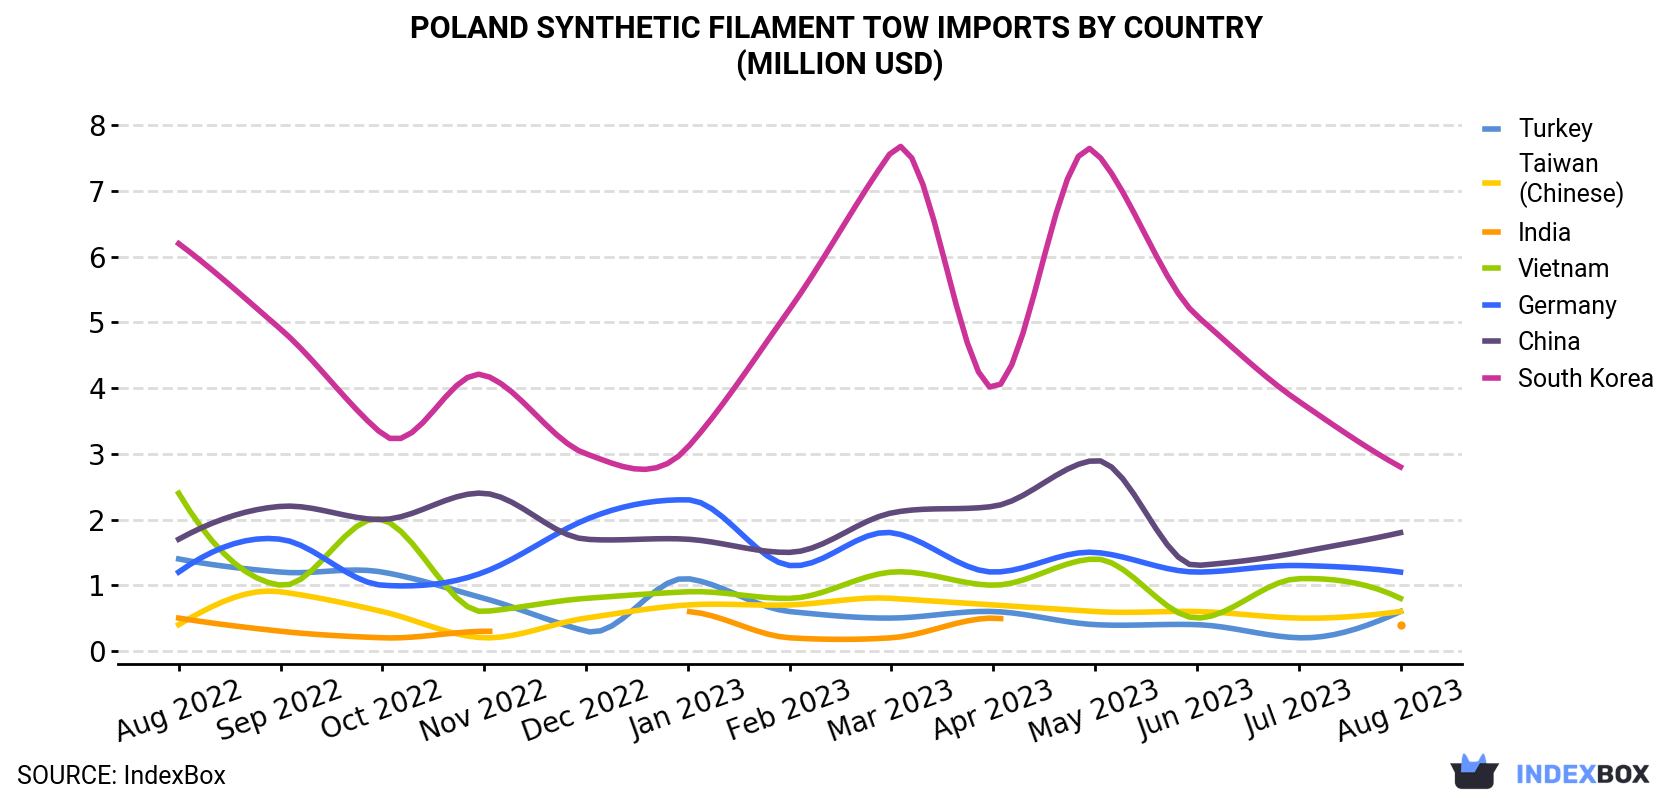 Poland Synthetic Filament Tow Imports By Country (Million USD)